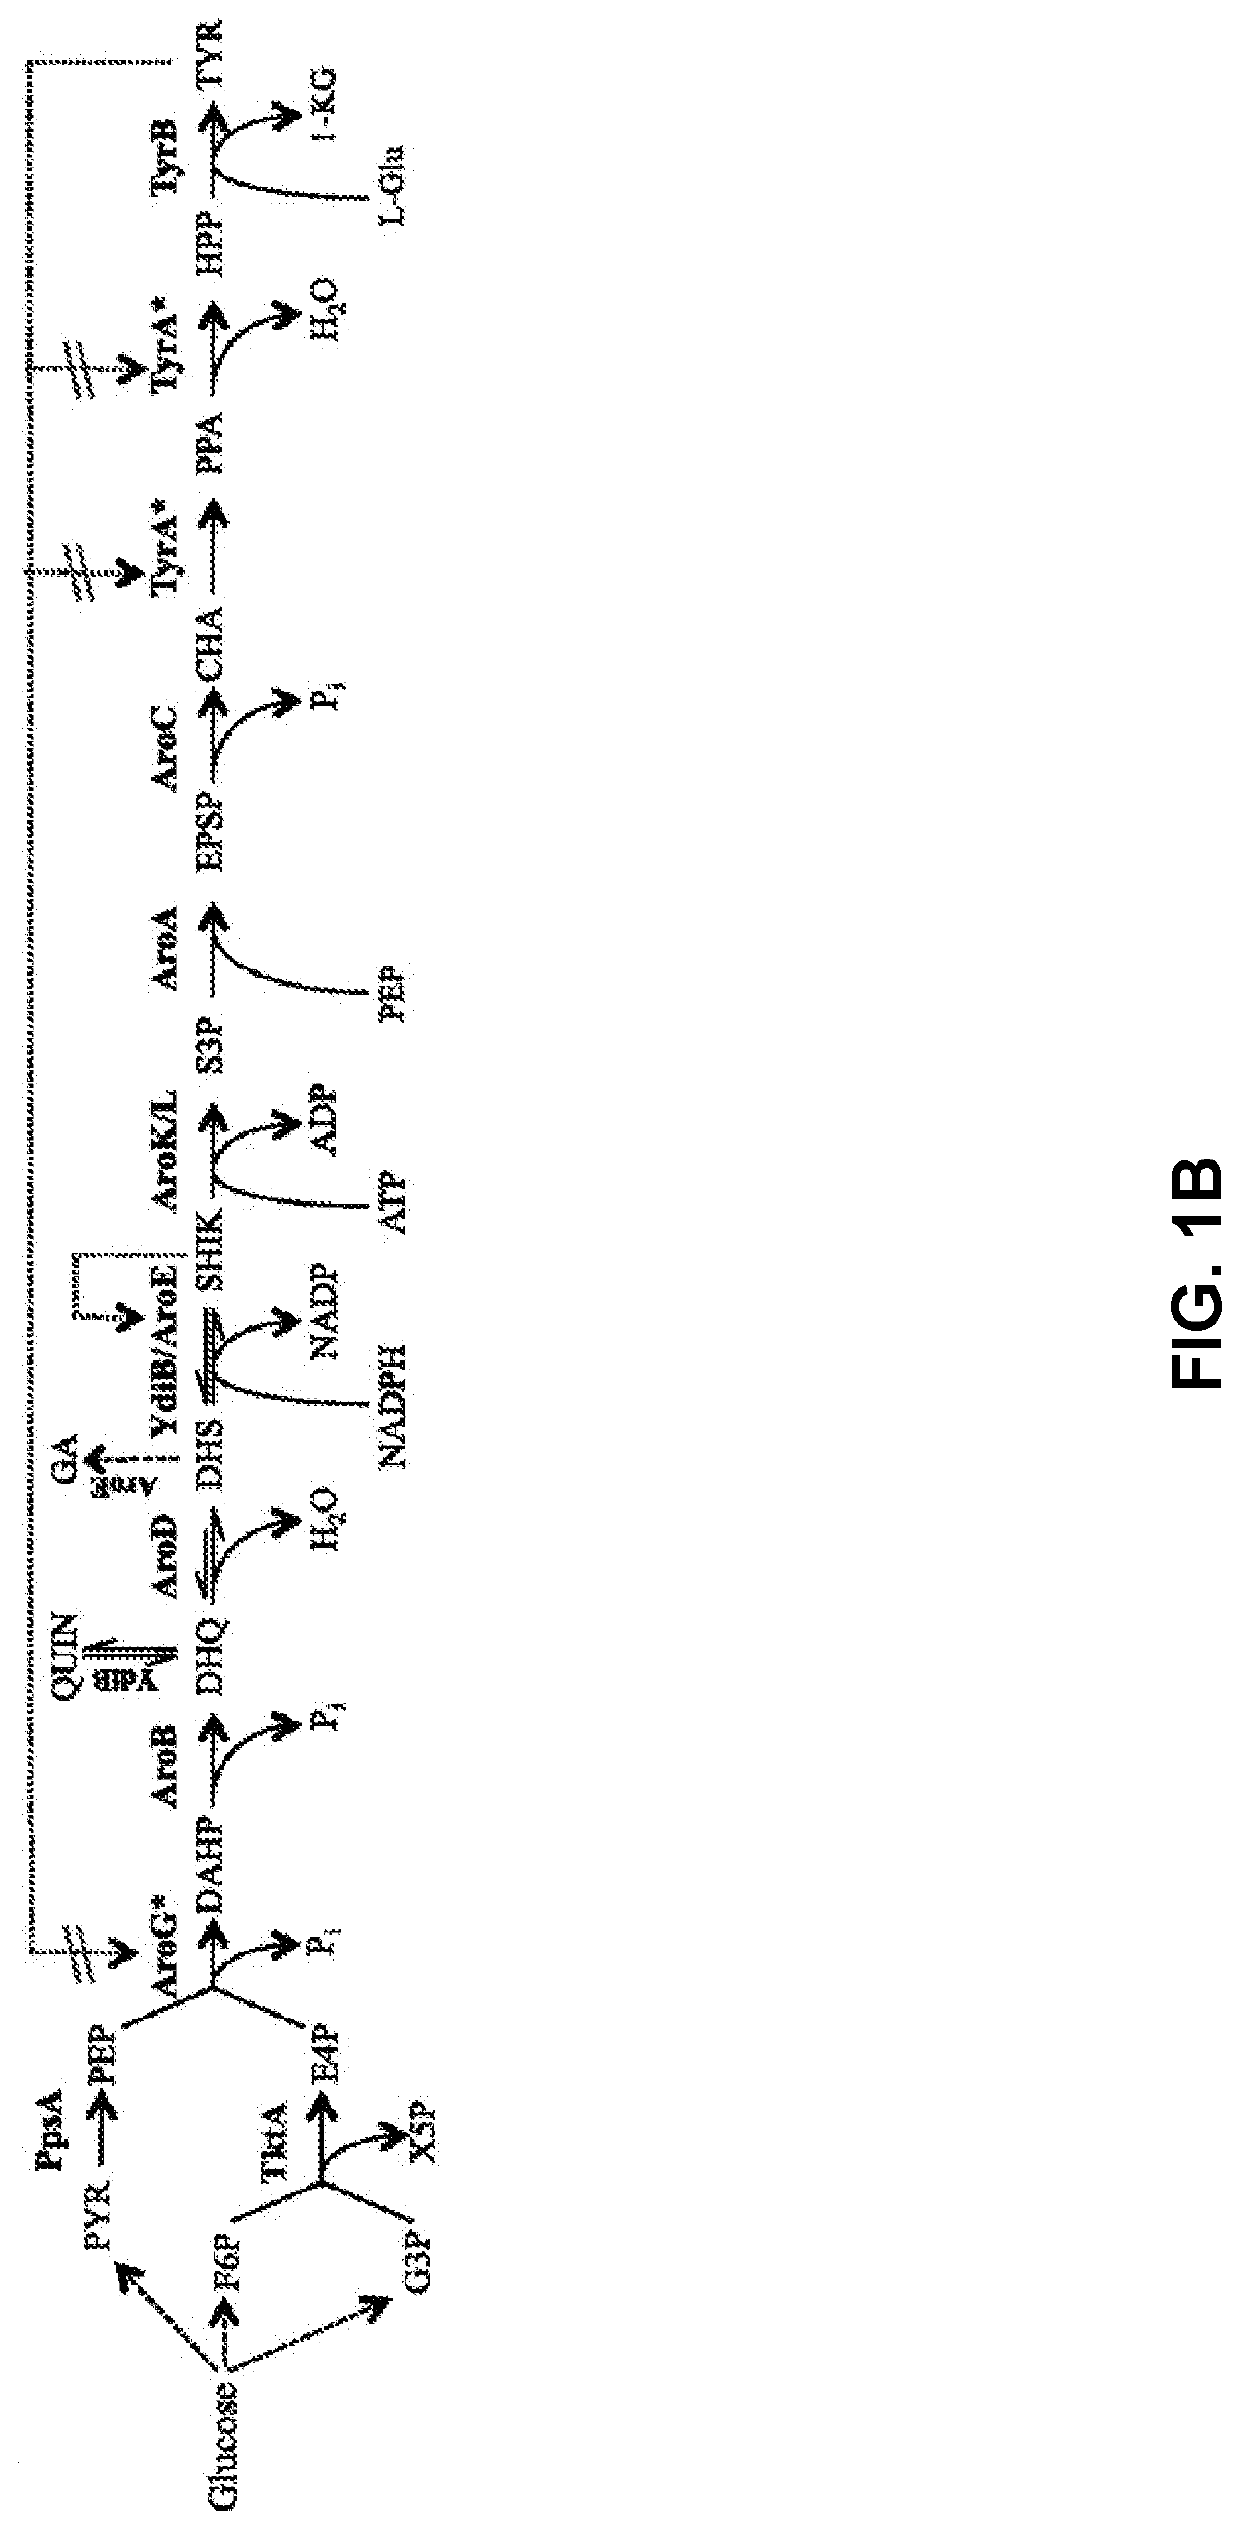 Compositions and methods for making benzylisoquinoline alkaloids, morphinan alkaloids, thebaine, and derivatives thereof